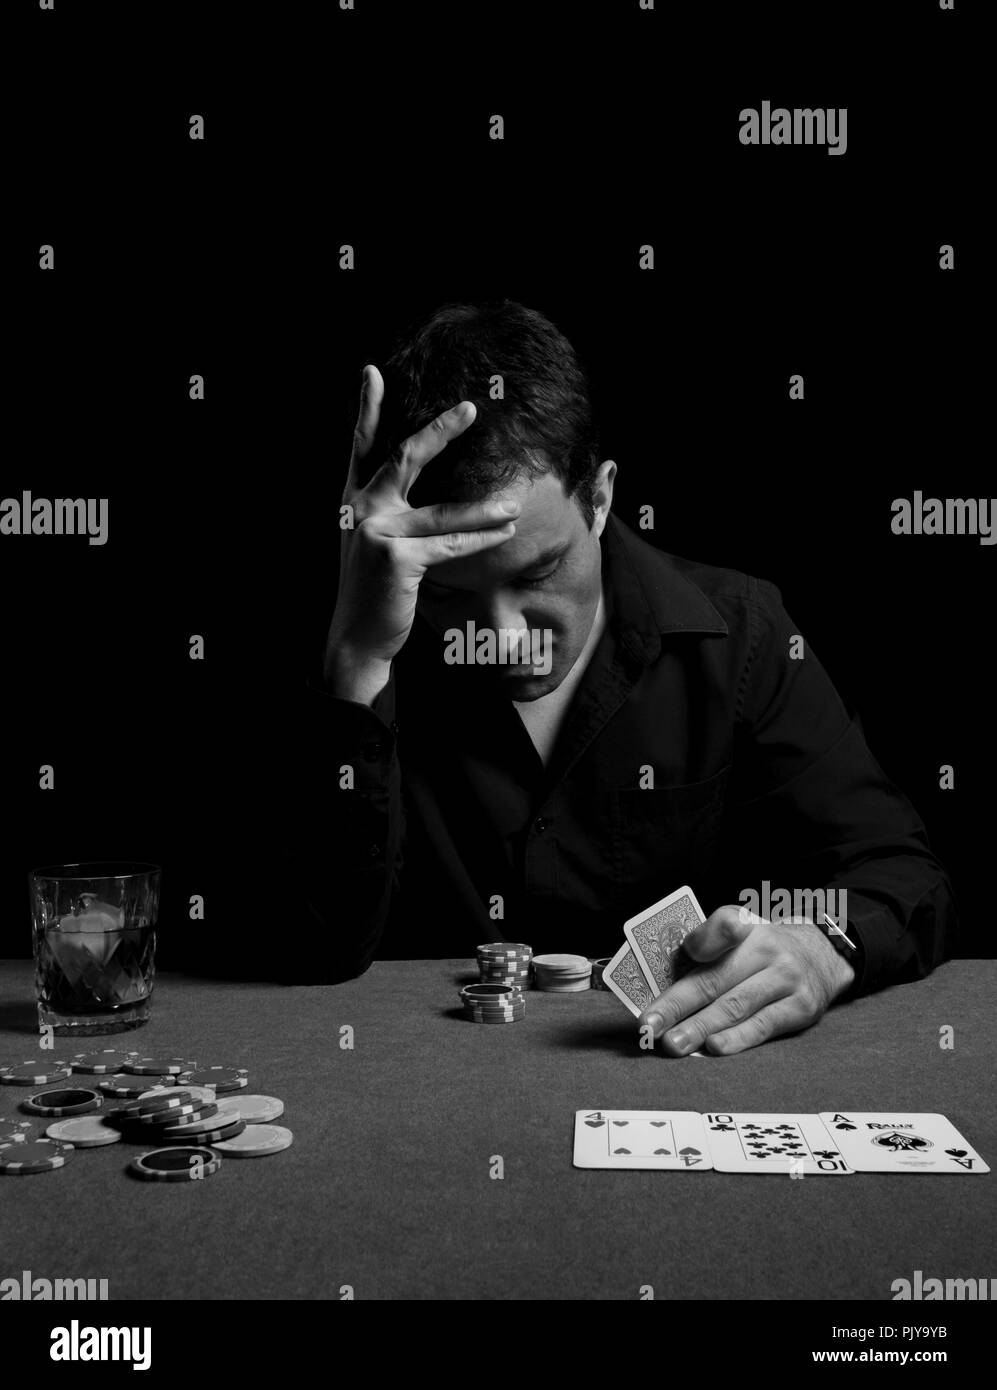 Concentrated man playin a game of poker texas hold'em looking at his cards tension tense tensed Stock Photo